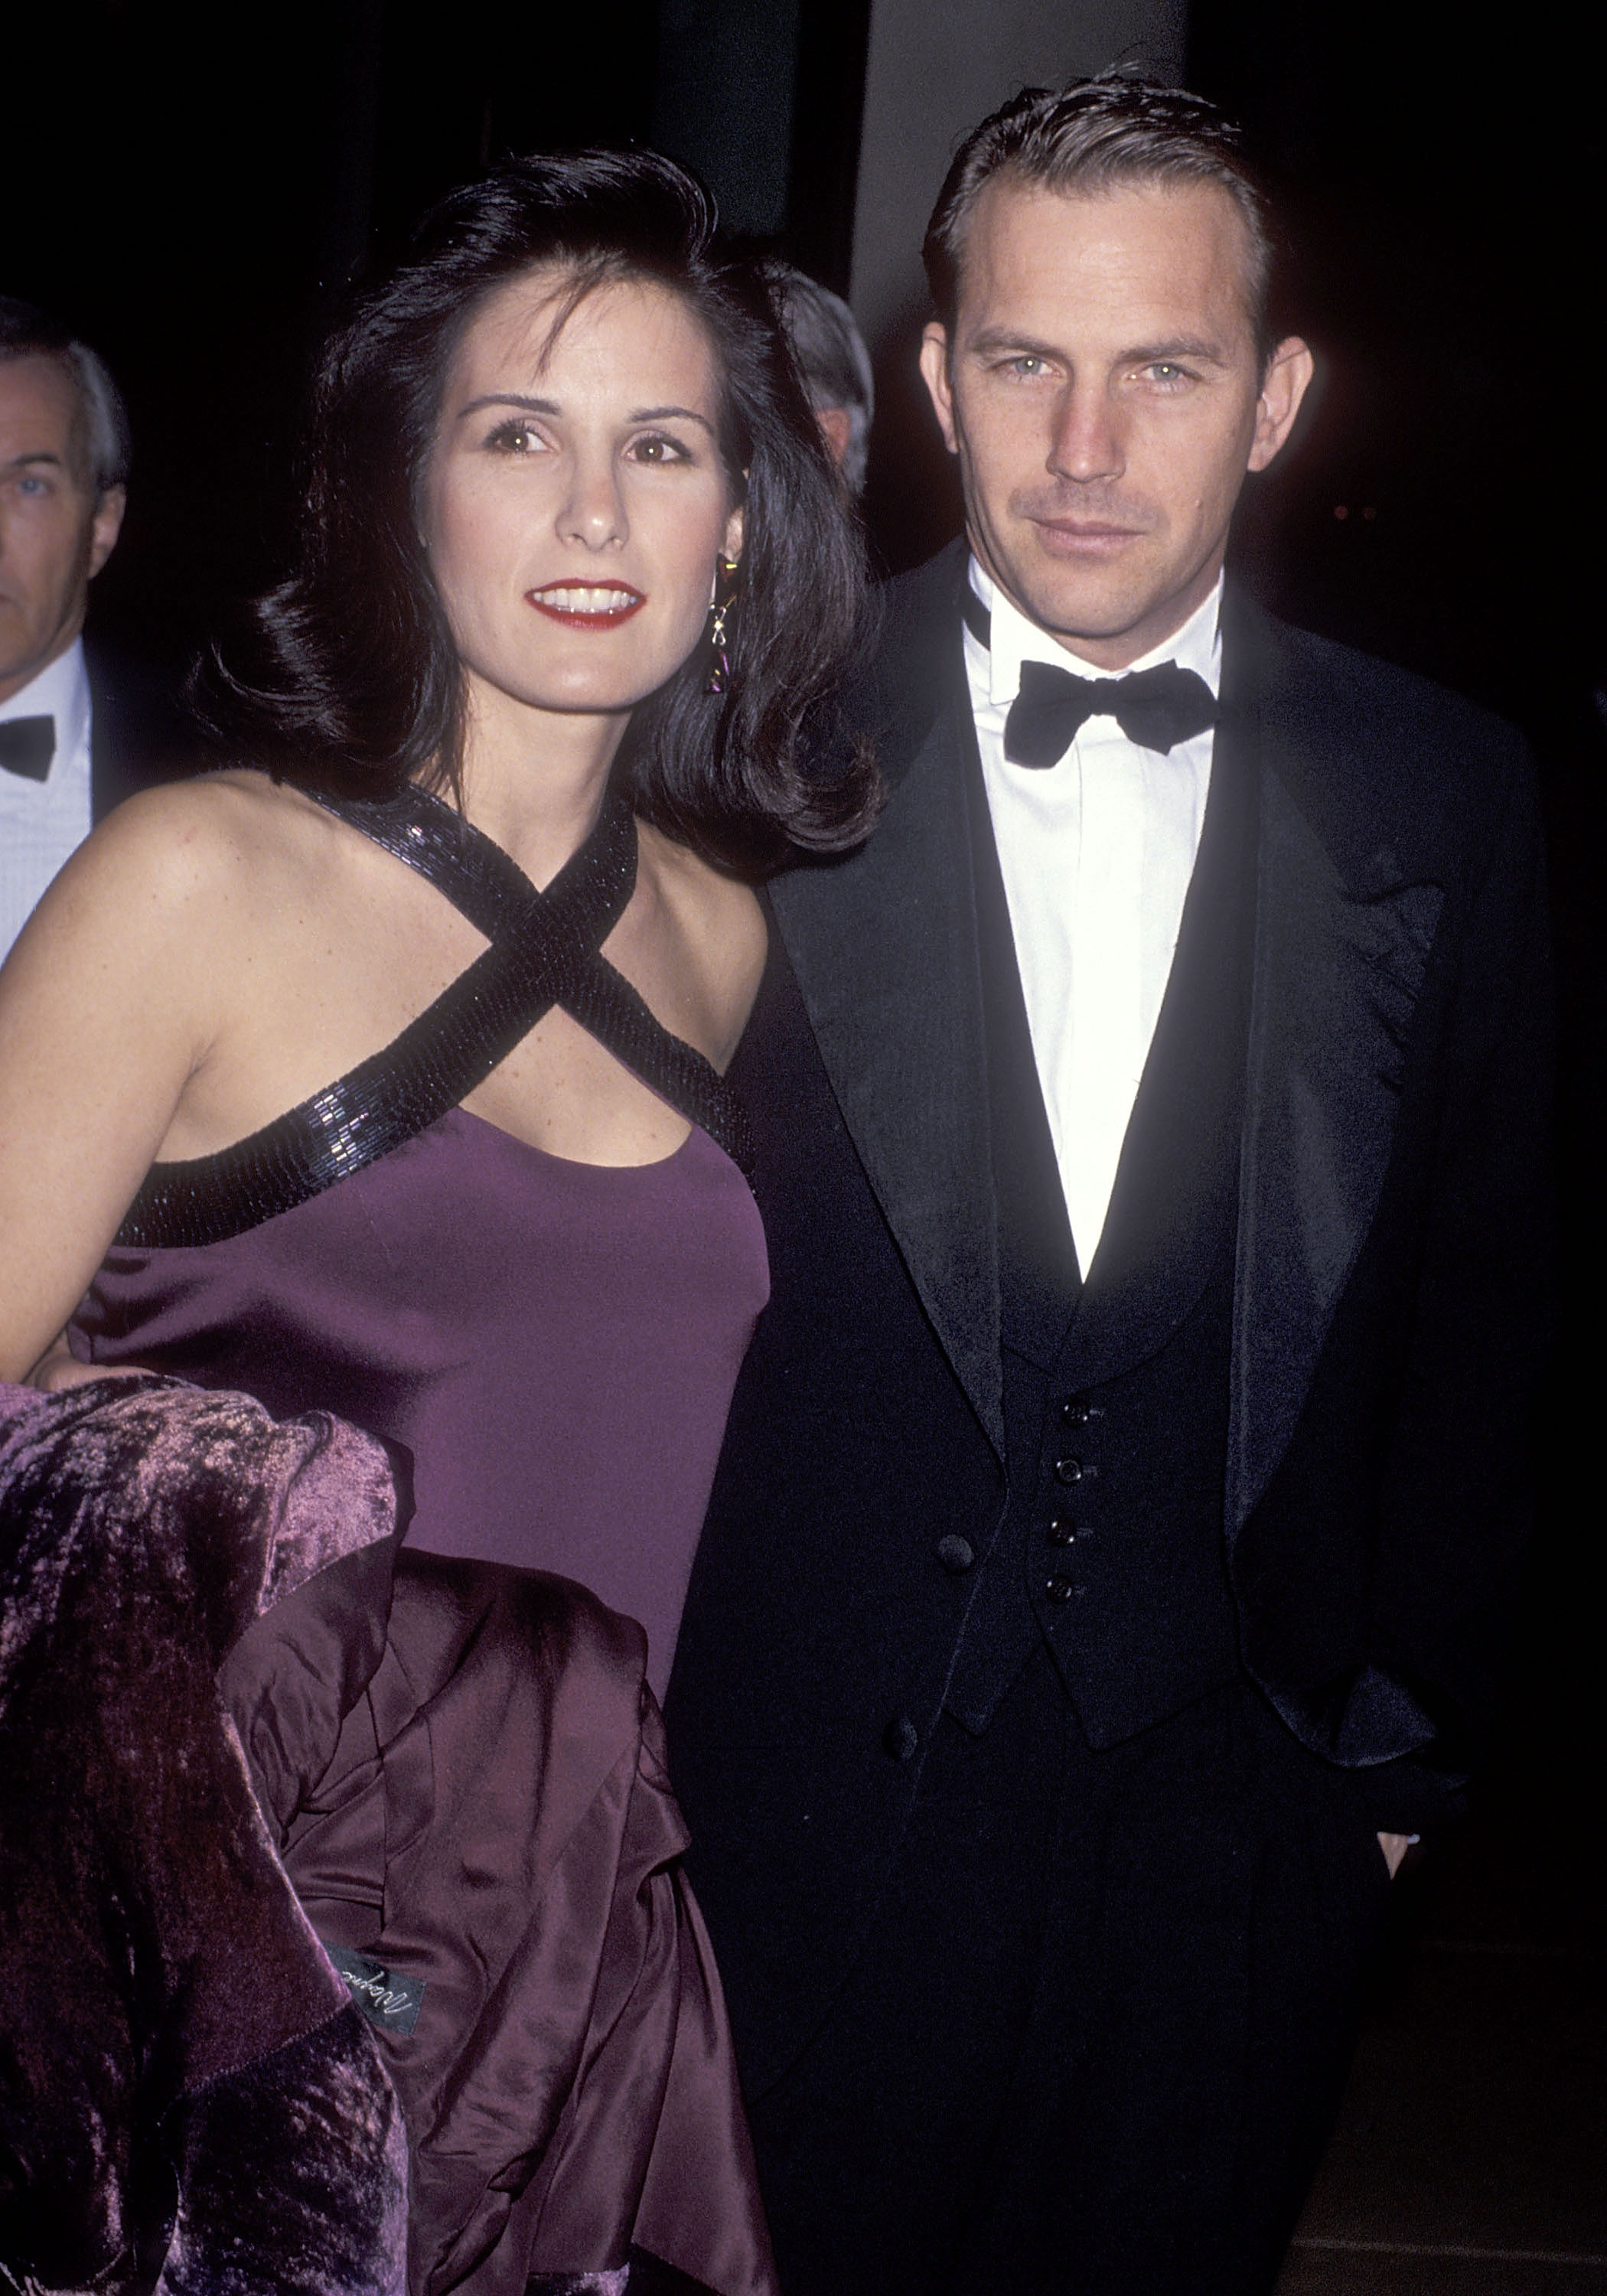 Cindy and Kevin Costner at the 48th Annual Golden Globe Awards on January 19, 1991, in Beverly Hills, California | Source: Getty Images